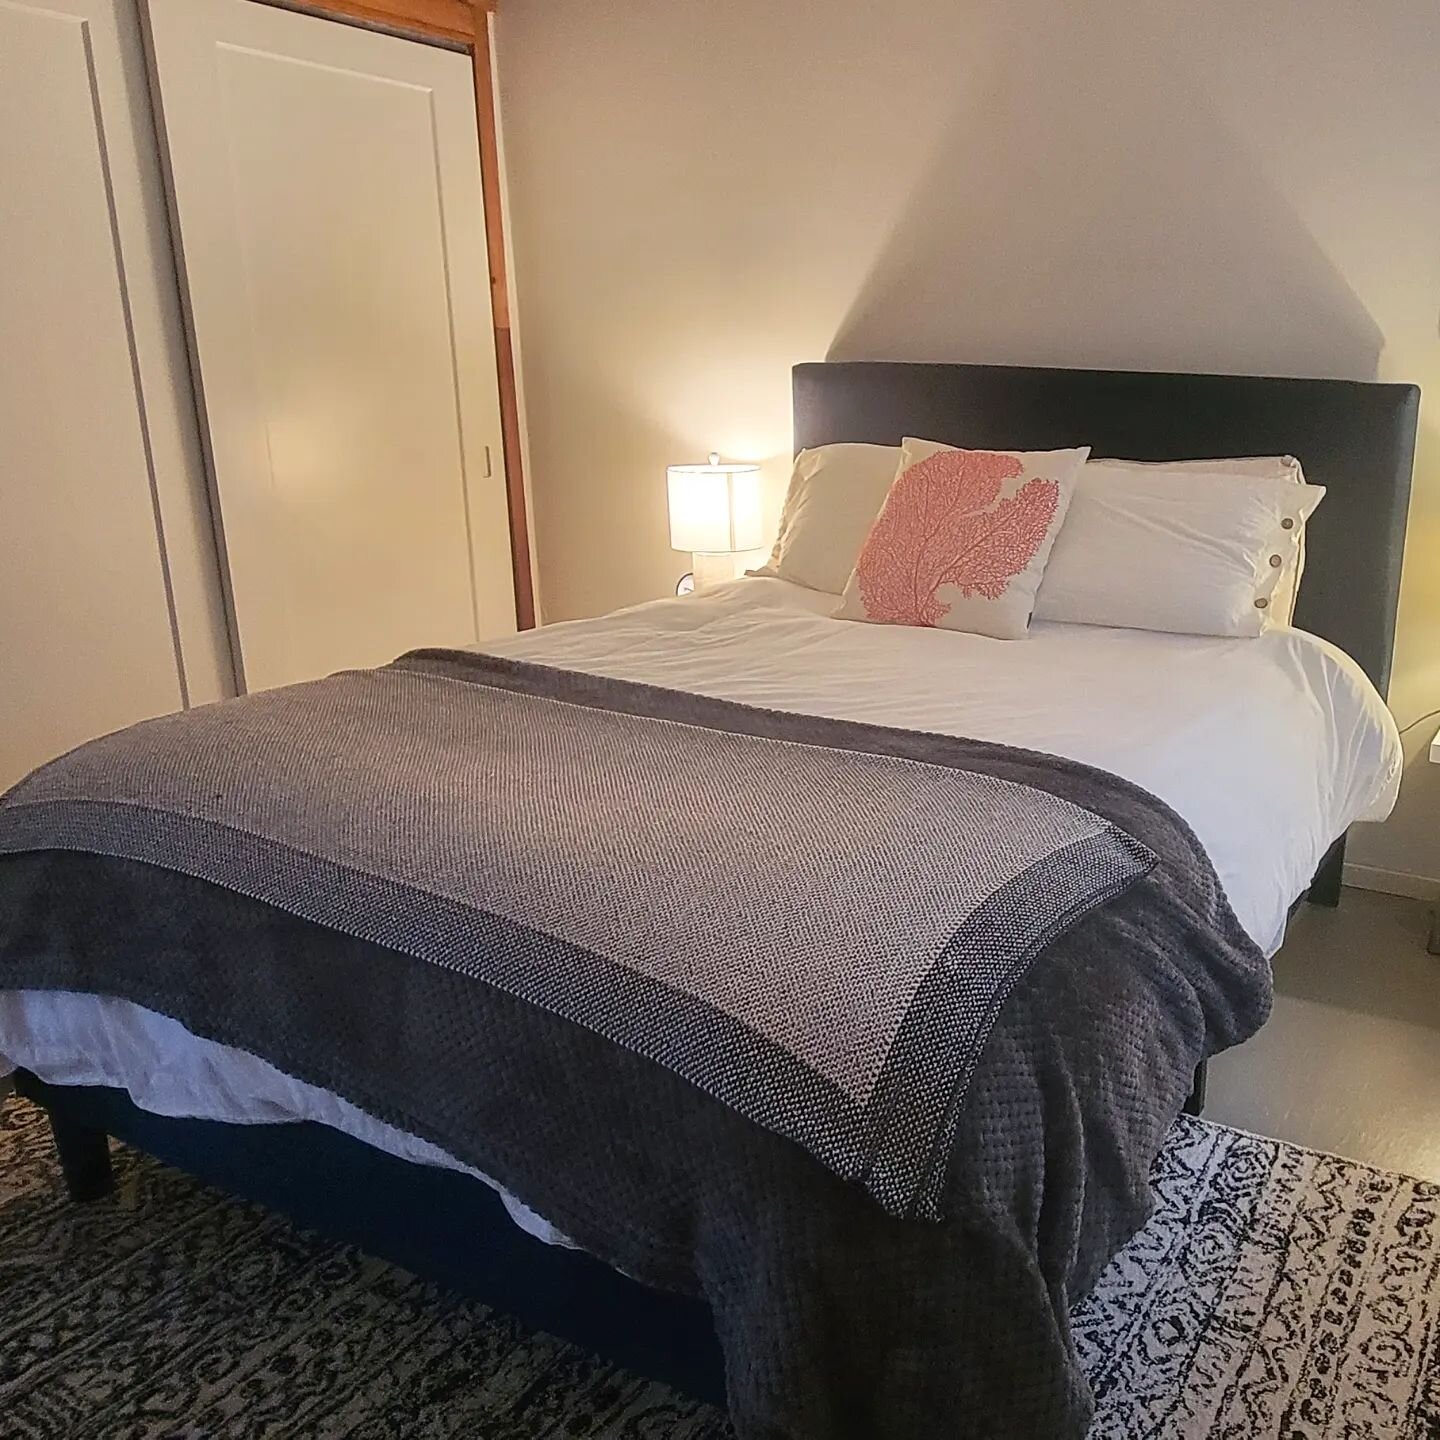 The cabin got a new bed. Does it look comfy? It is!!

#newbed #vashon #vashonvacationrental #vashonislandlife #islandlife #isthmuslife #islandtime #islandvacation #quartermastercabin